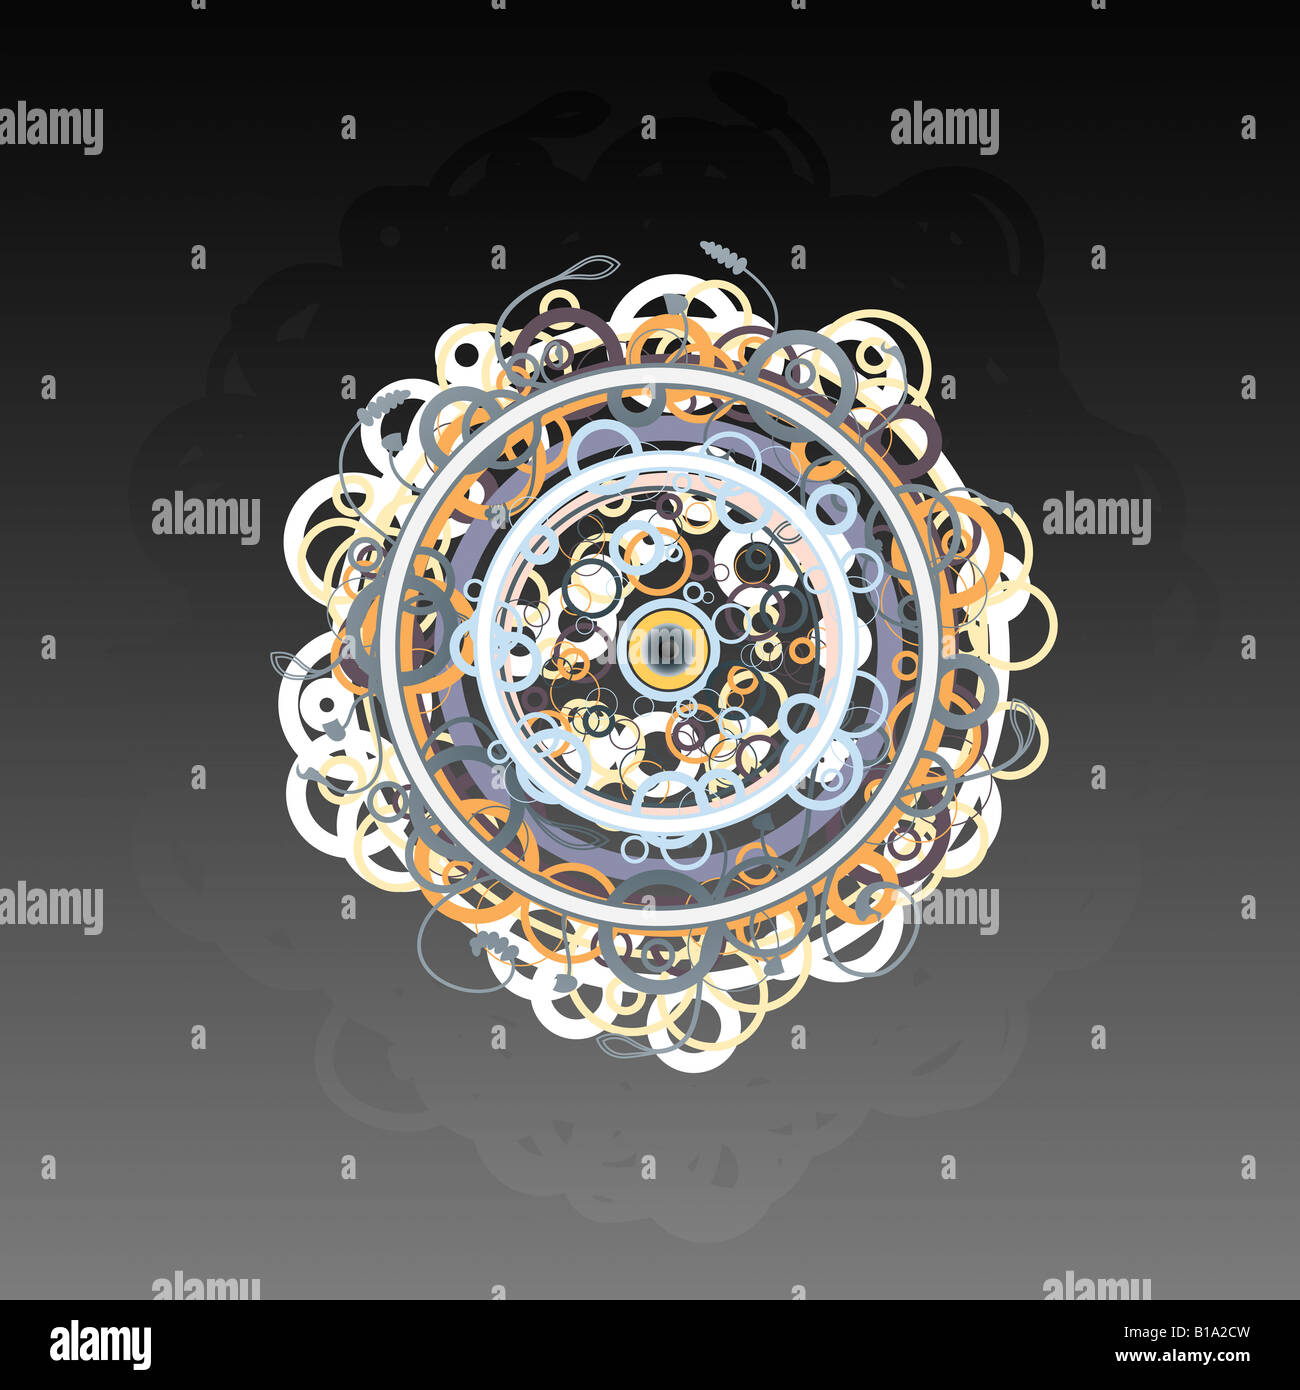 Vector illustration of an abstract grunge and floral circle design element Stock Photo